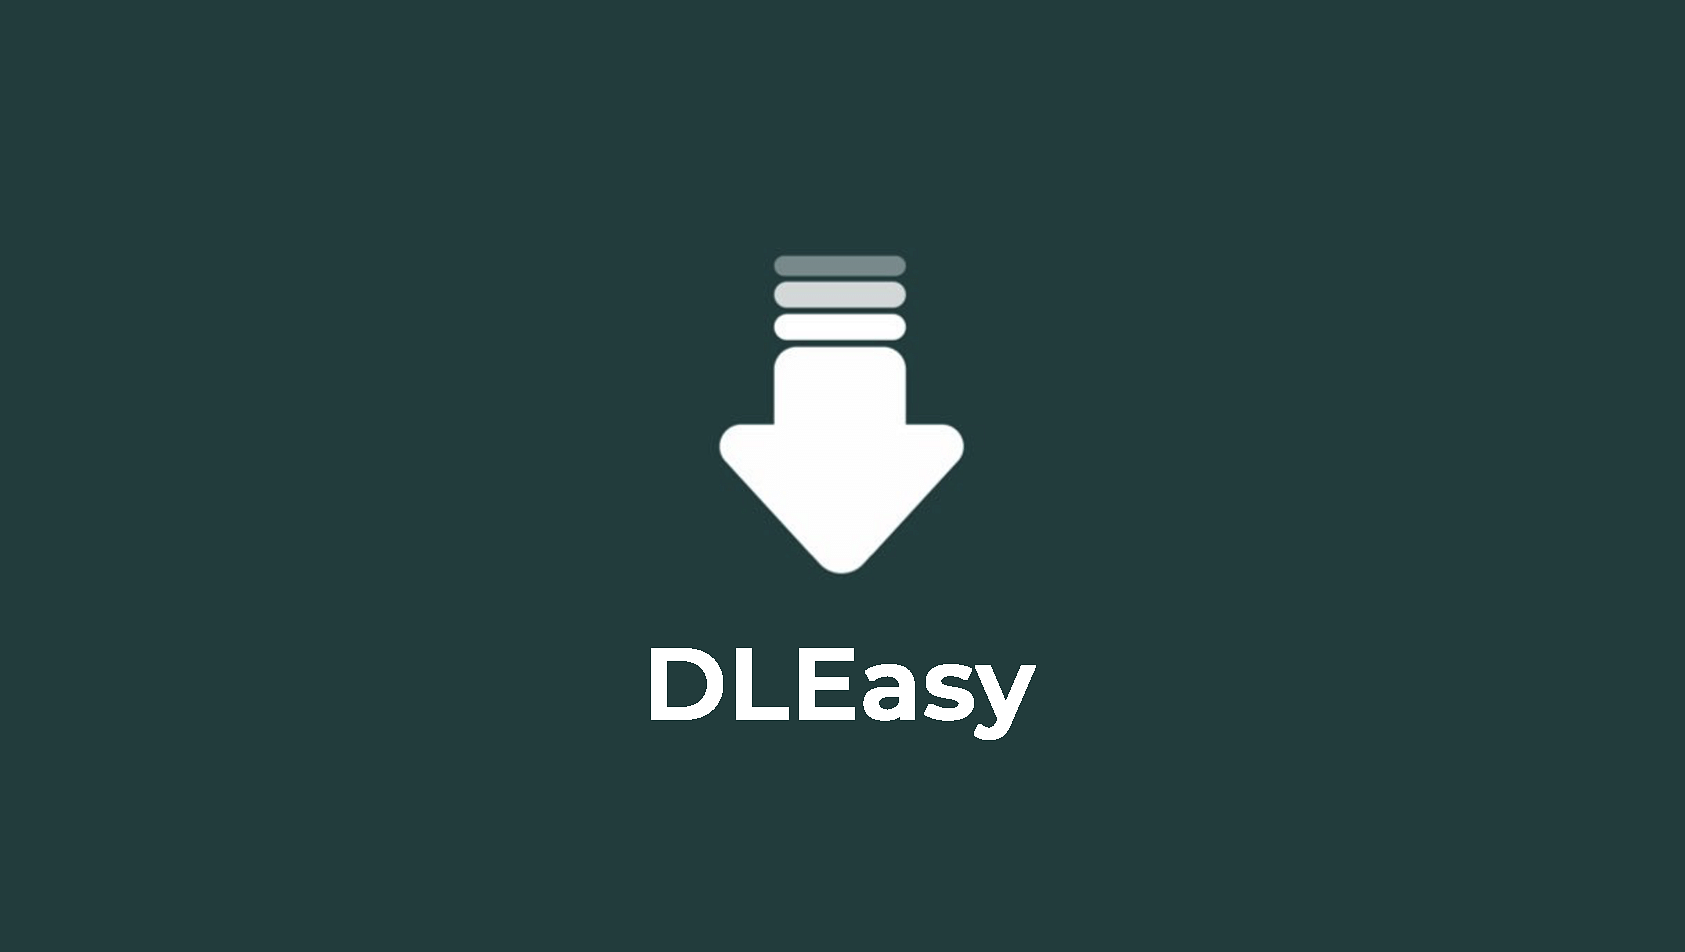 DLEasy